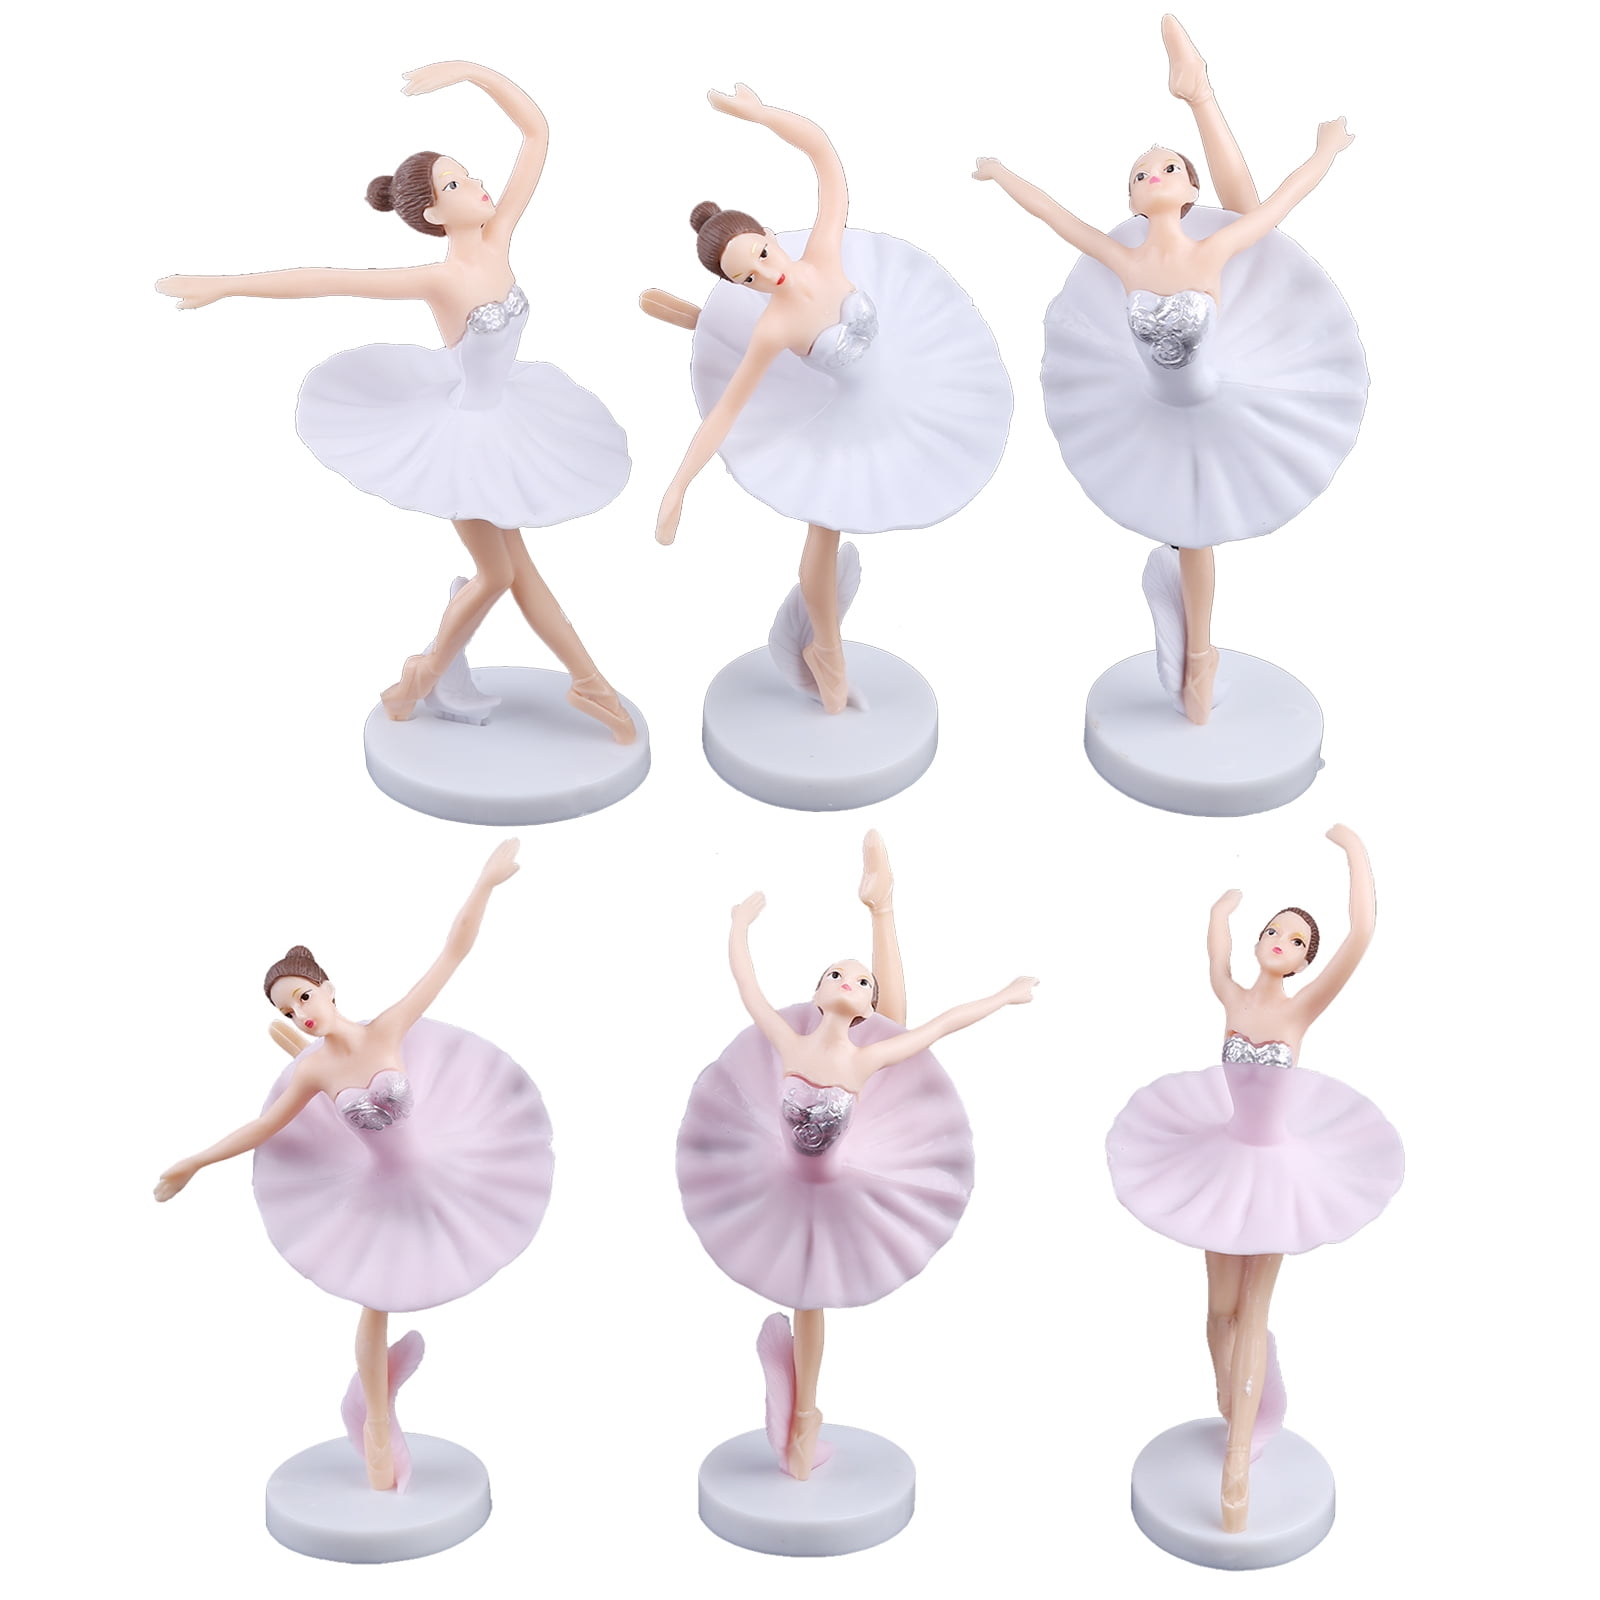 BOOMTB 6 Pieces Ballerina Miniature Figurine Ballet Dancer Cake Toppers for  Cake Decors 